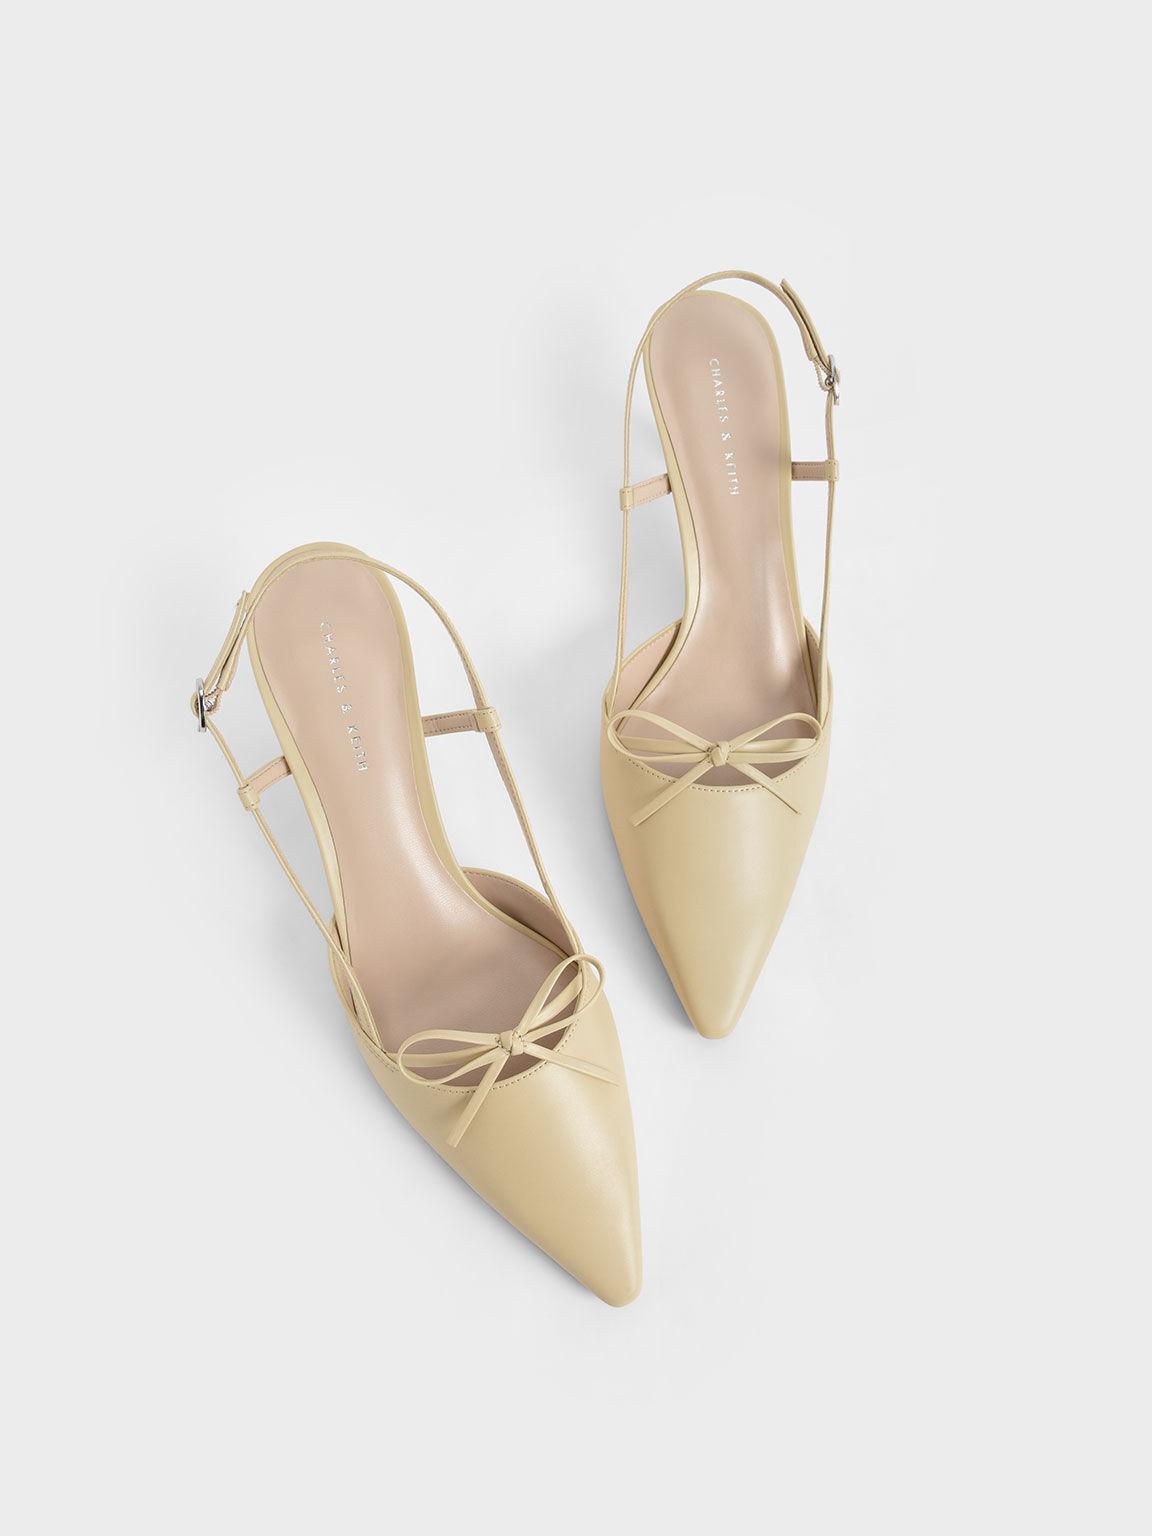 Charles & Keith Loey Ankle-strap Platform Pumps In Beige | ModeSens